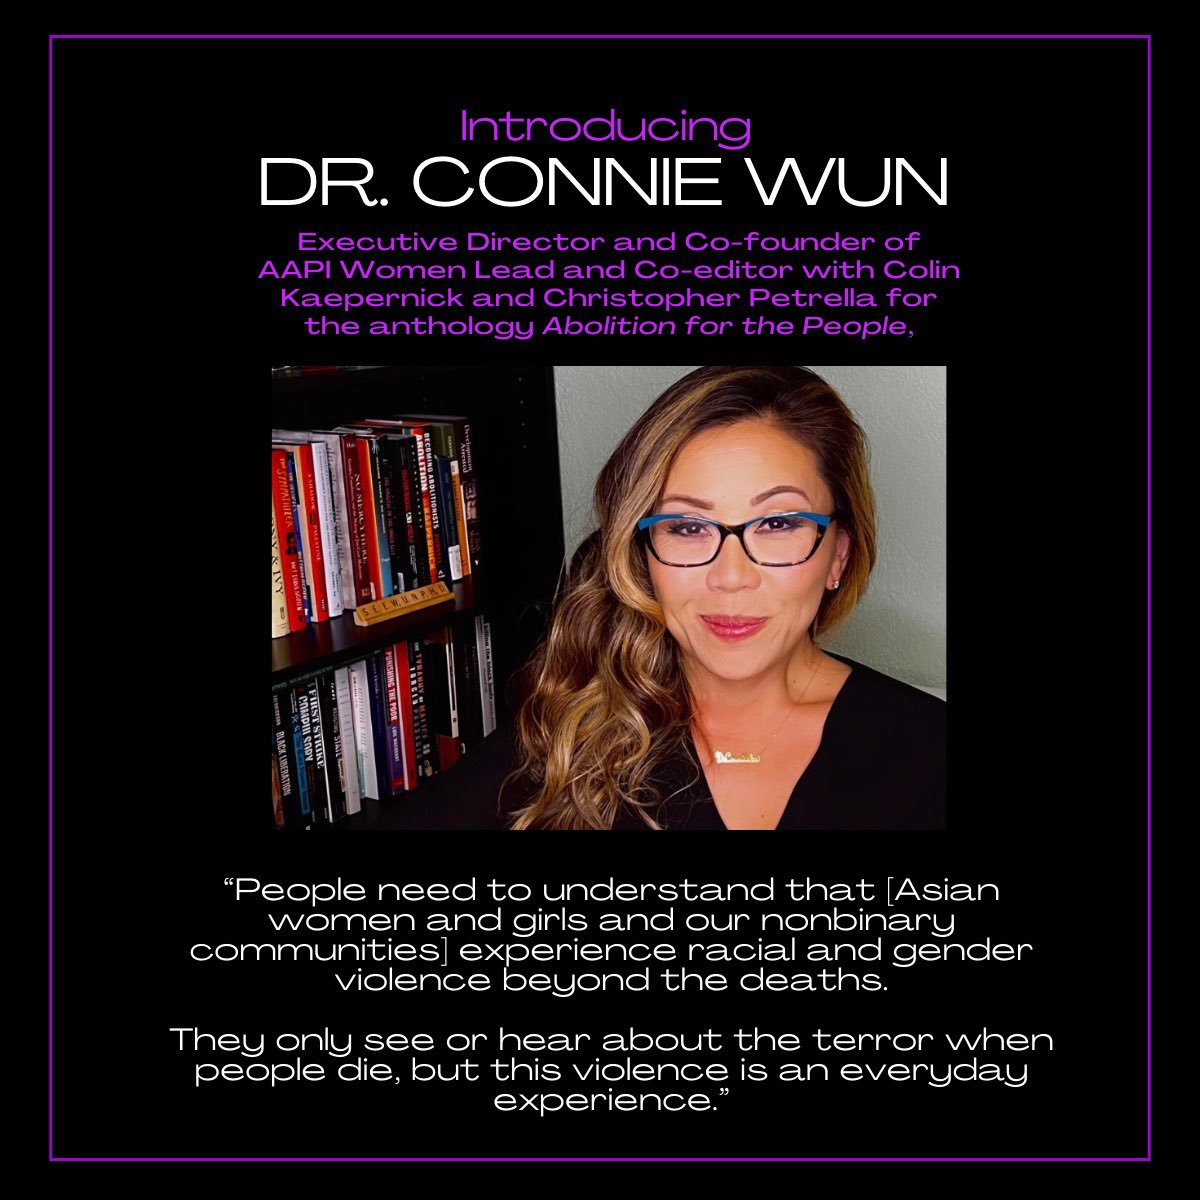 Leading up to our virtual event “Till All of us Are Free: The convergence of Prison abolition and Reproductive Justice” we want to highlight the panelists joining us on April 11th so introducing @conniewunphd from @AAPIWomenLead!